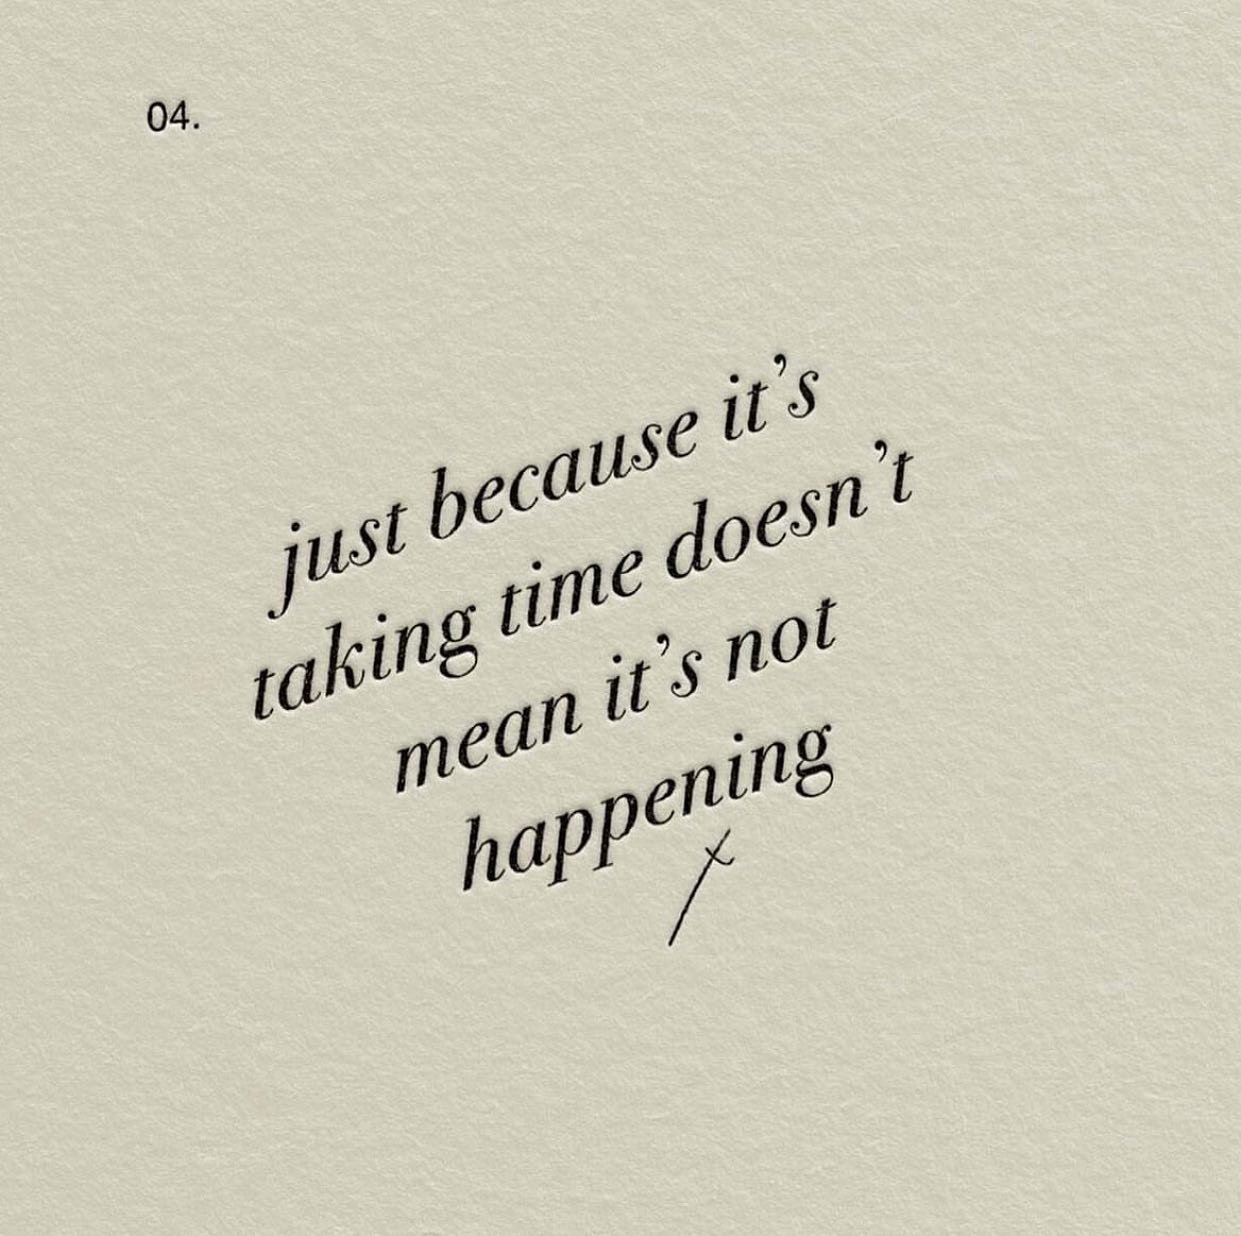 Give it time ||
&middot;
&middot;
&middot;
🙏🏼 Reminder: social media is simply a guide &amp; cannot replace personalised care. Our posts are designed to share our interests &amp; areas of passion. Please take only what resonates &amp; serves you. I